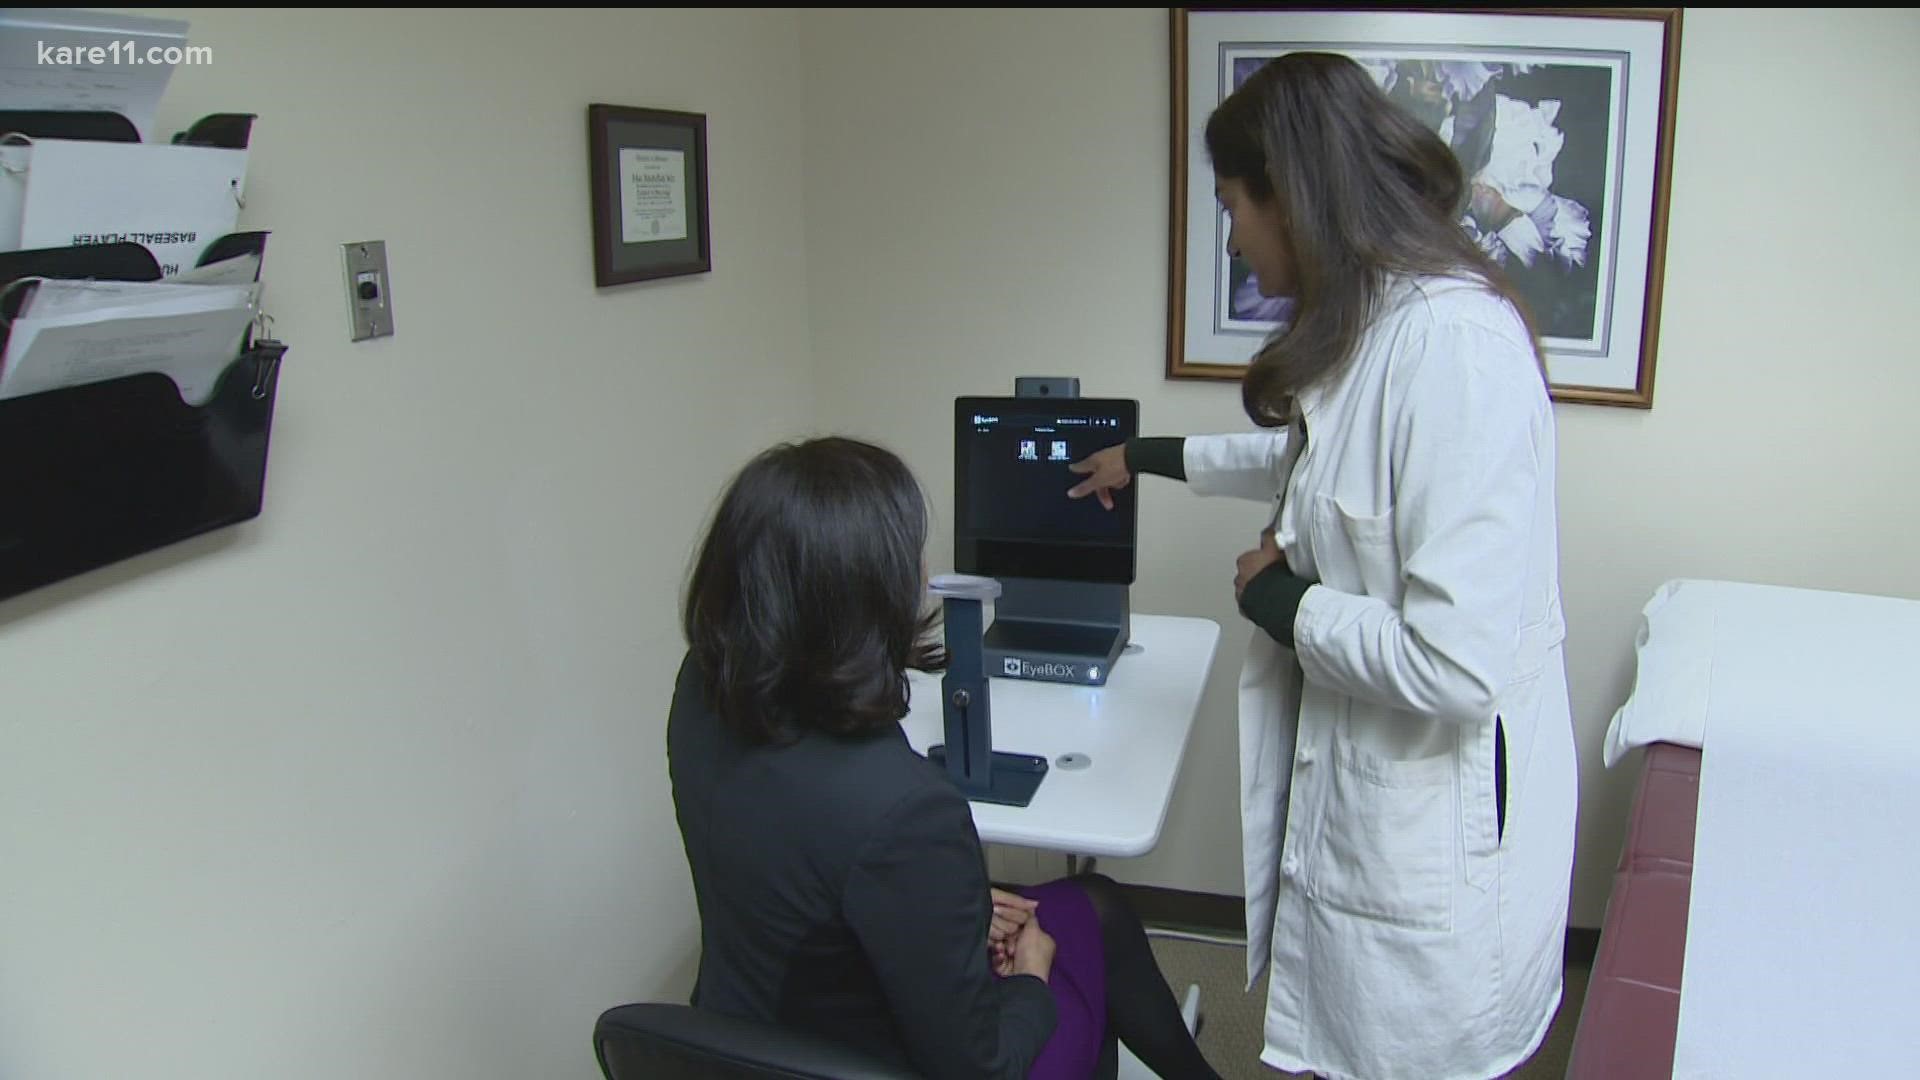 The FDA recently approved a first-of-its-kind concussion detection device, which was invented by one of Minnesota's top neurosurgeons, Dr. Uzma Samadani.